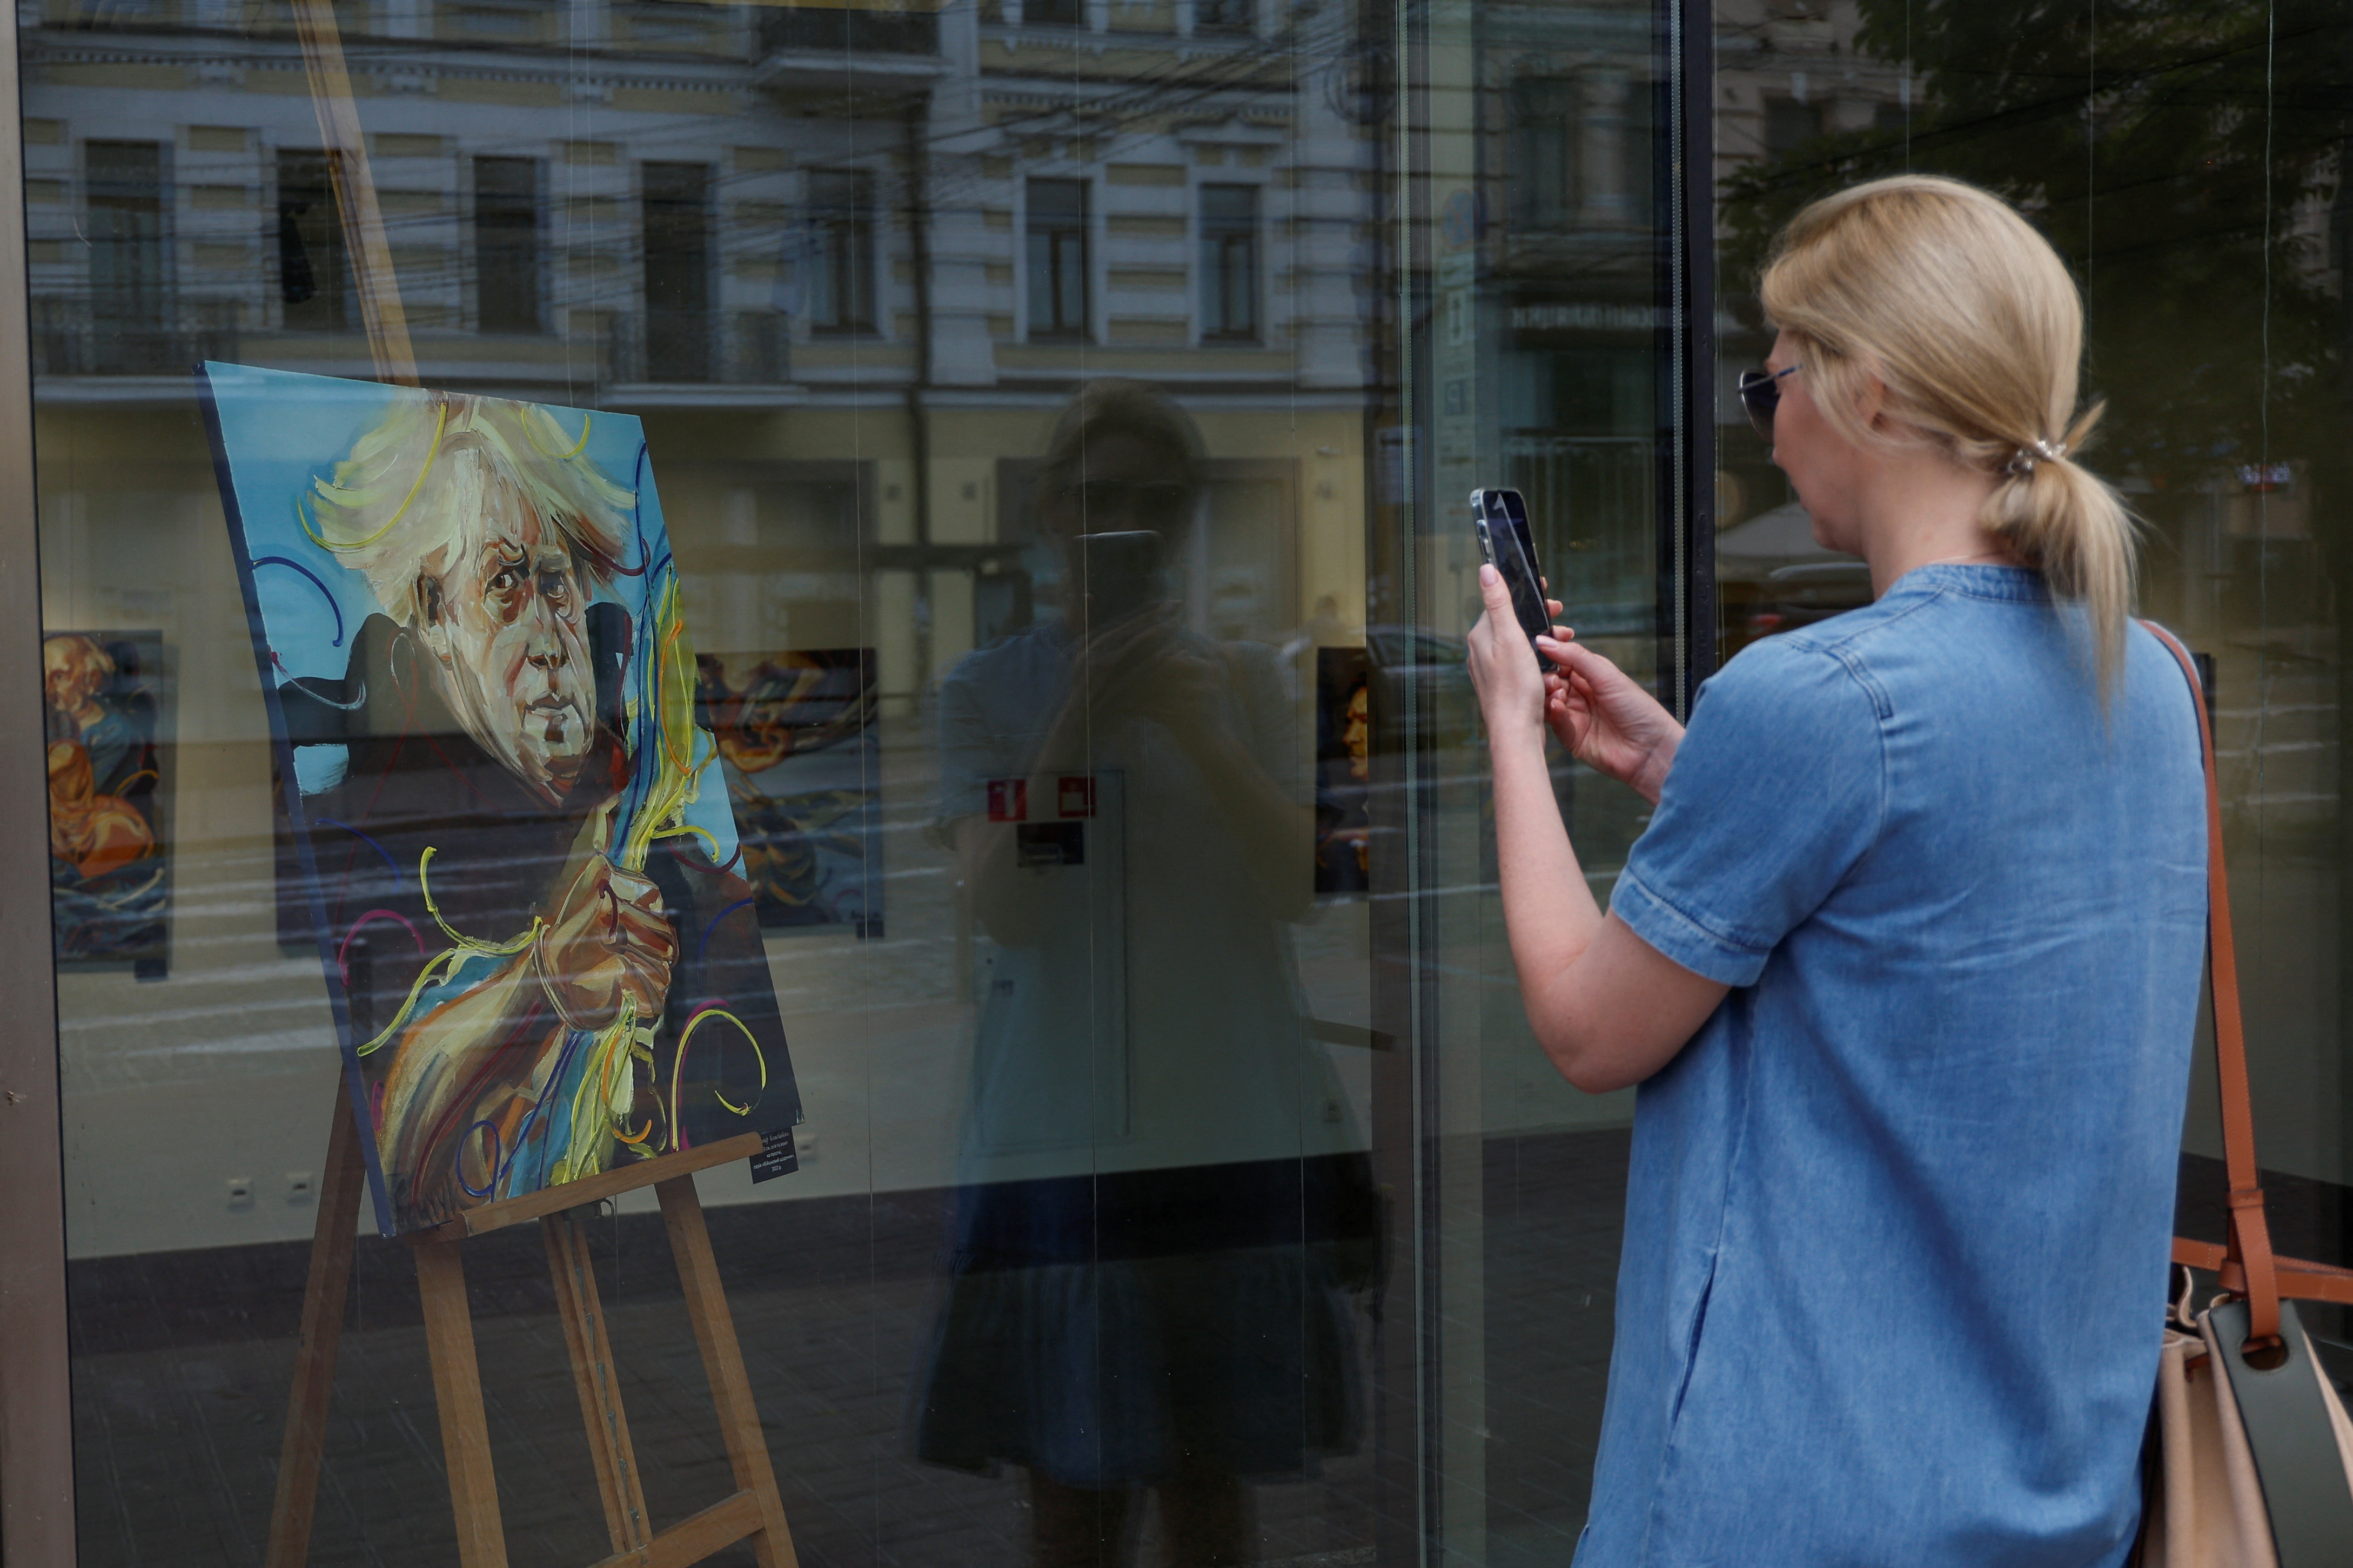 A woman takes a picture of a portrait of British Prime Minister Boris Johnson displayed at a gallery in Kyiv